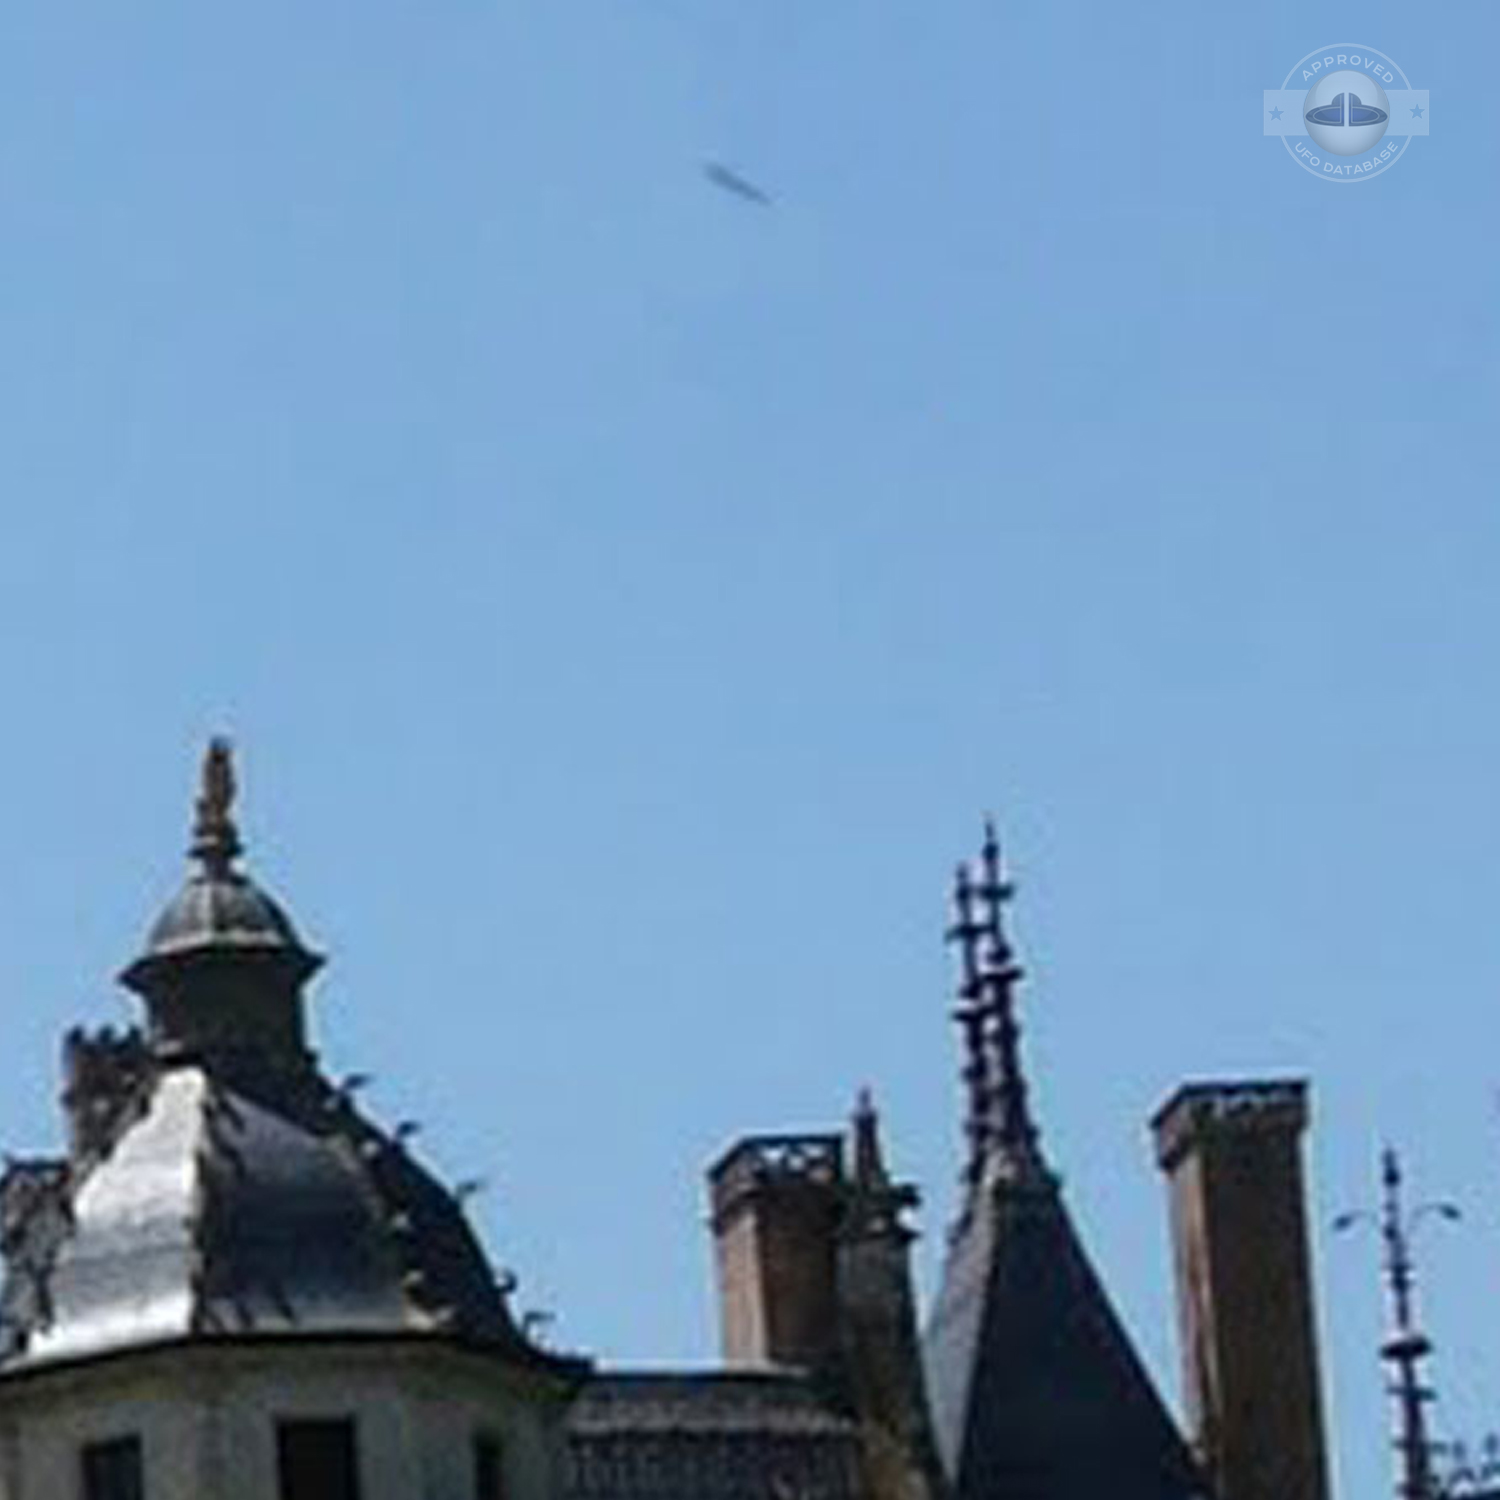 France Castle in Meillant Cher department - UFO picture July 11 2010 UFO Picture #239-3